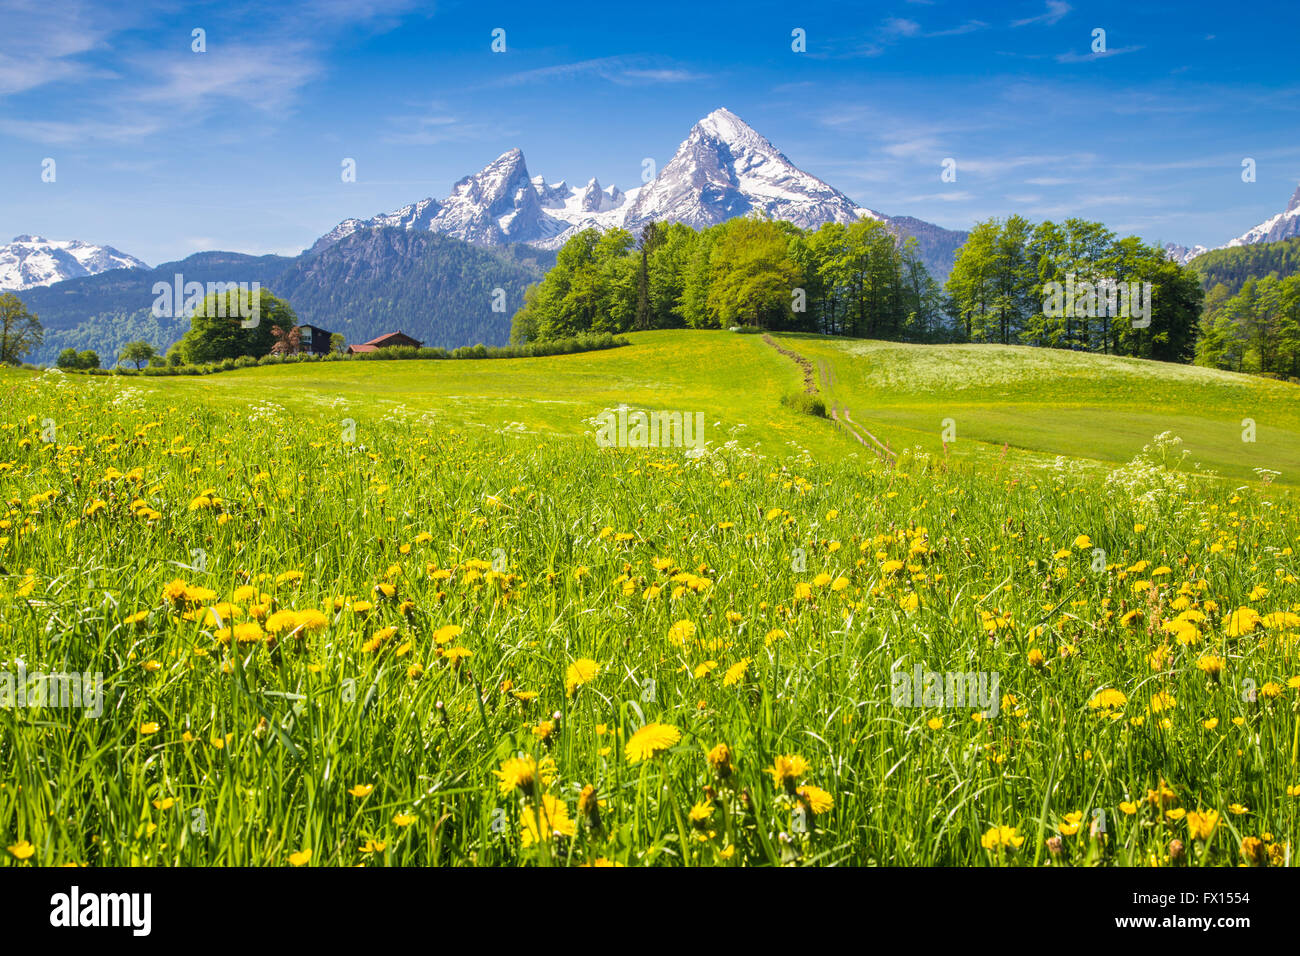 Idyllic landscape in the Alps with fresh green meadows, blooming flowers and snow-capped mountain tops in the background Stock Photo